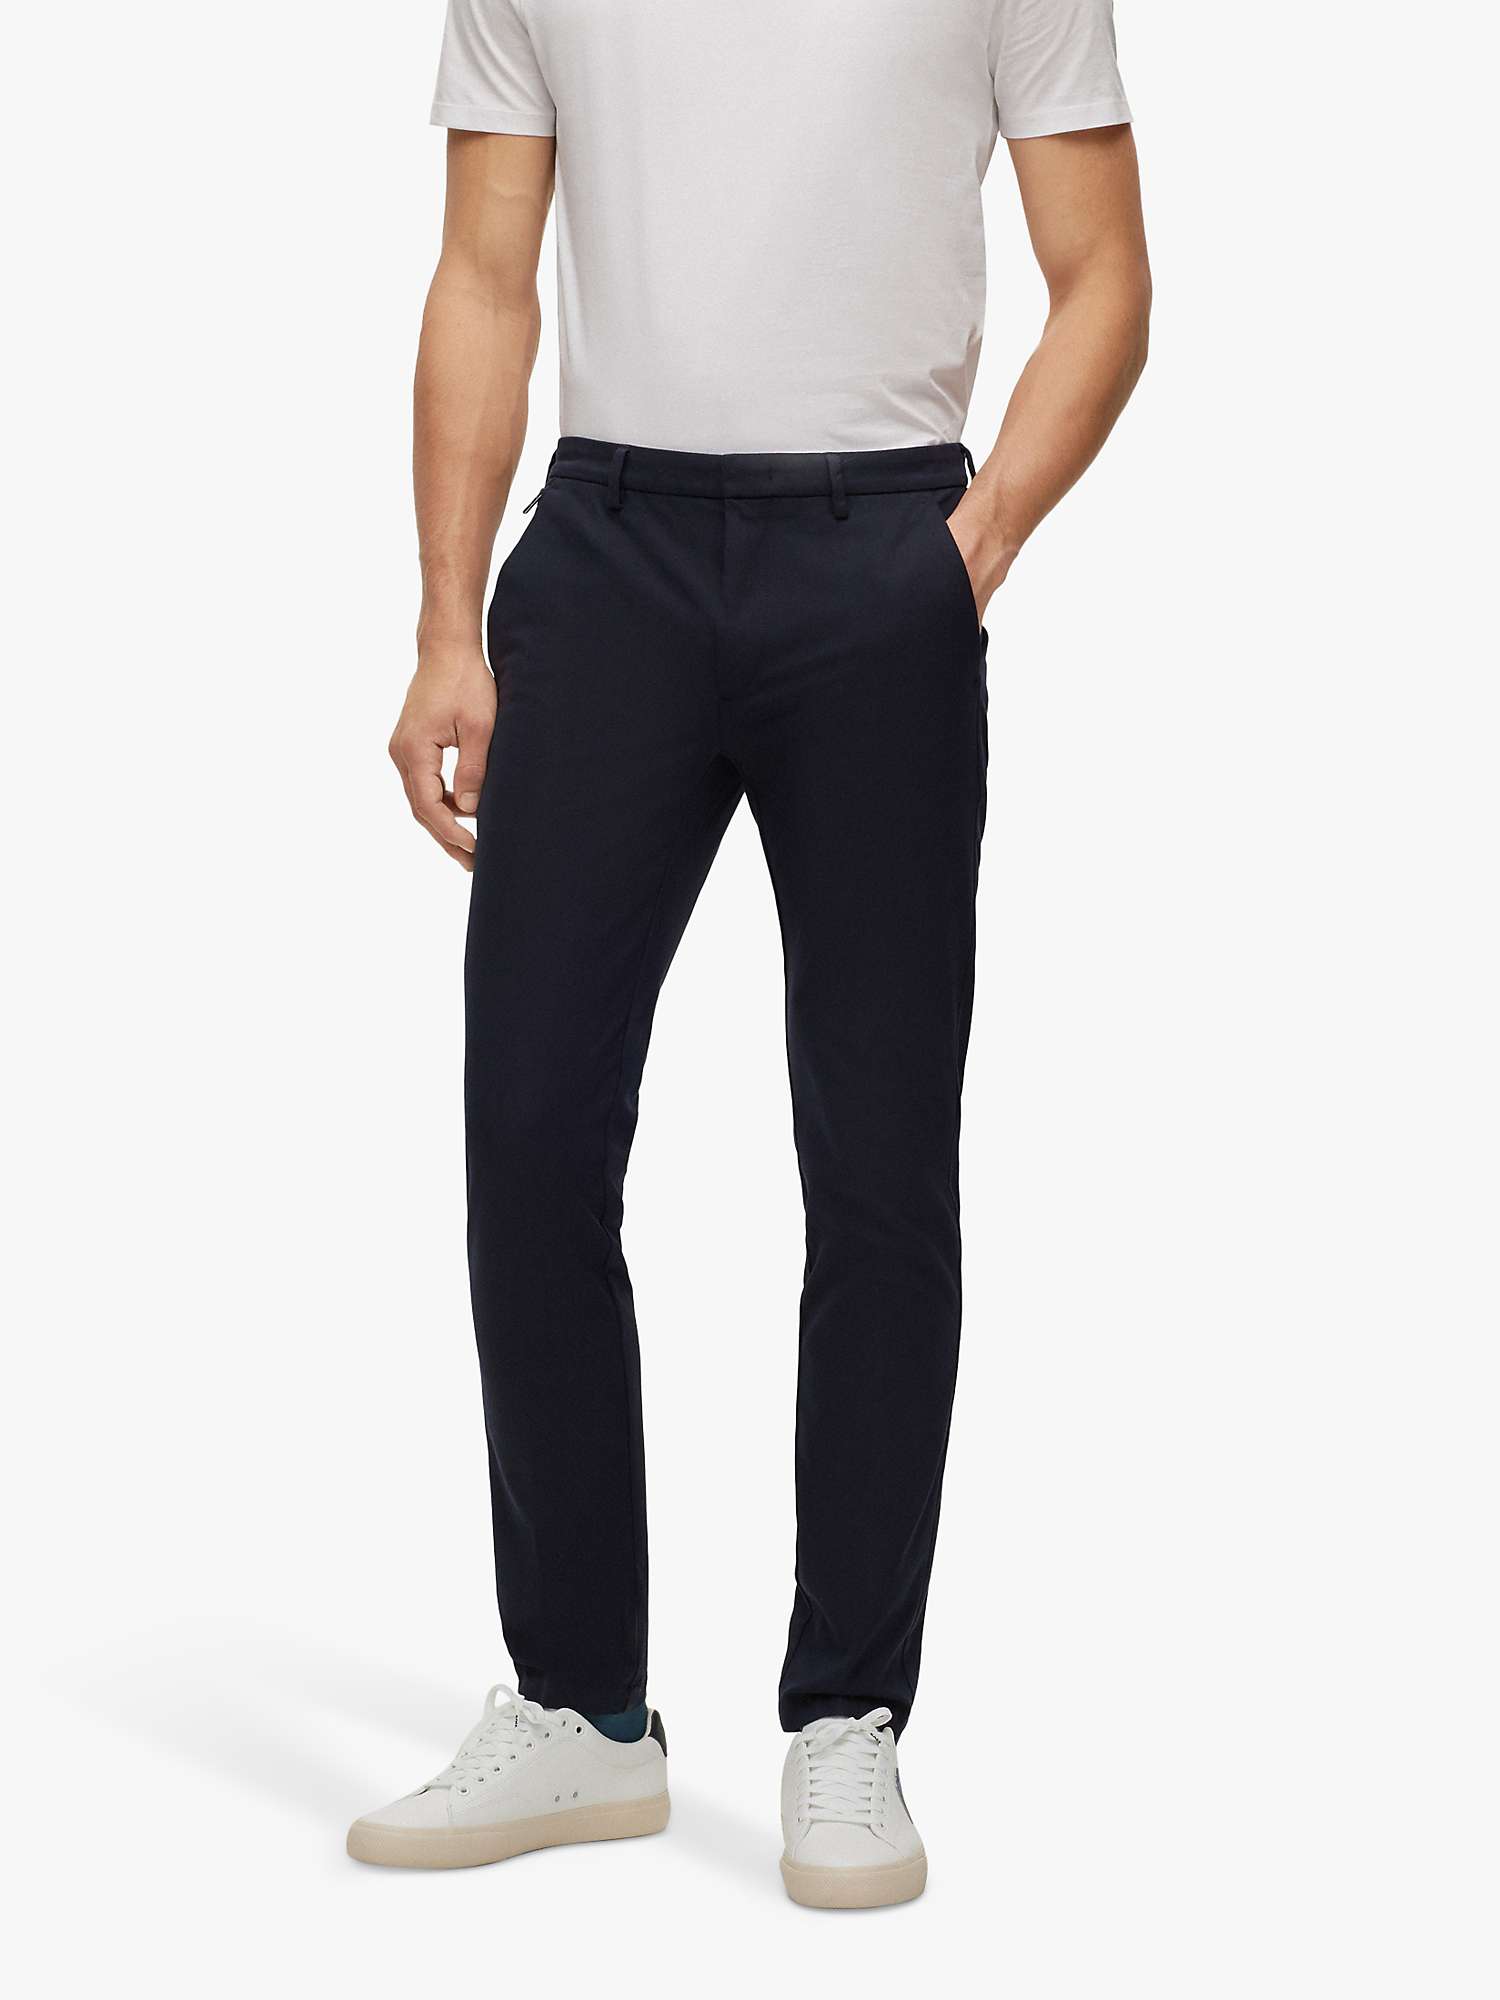 Buy BOSS Kaito Cotton Blend Slim Fit Trousers, Dark Blue Online at johnlewis.com